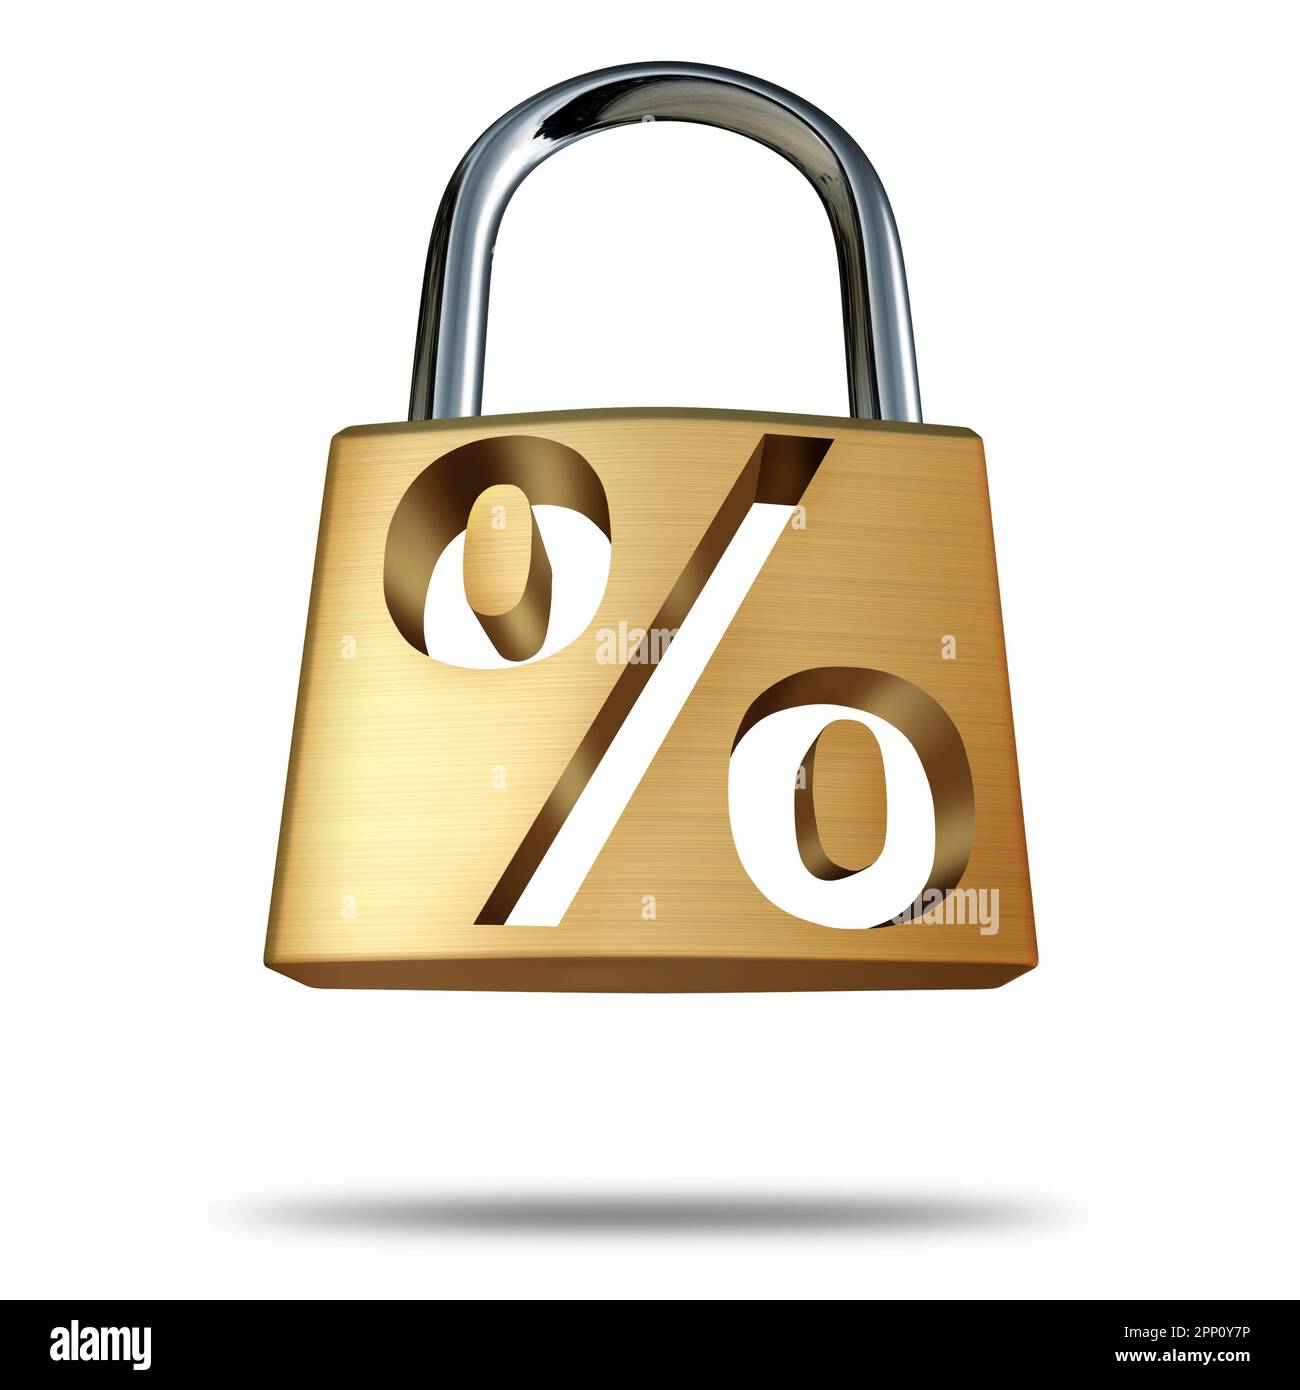 Fixed Income Investments and frozen borrowing cost or mortgage rates and locked in percent or percentage rate of return as a 3D illustration render. Stock Photo